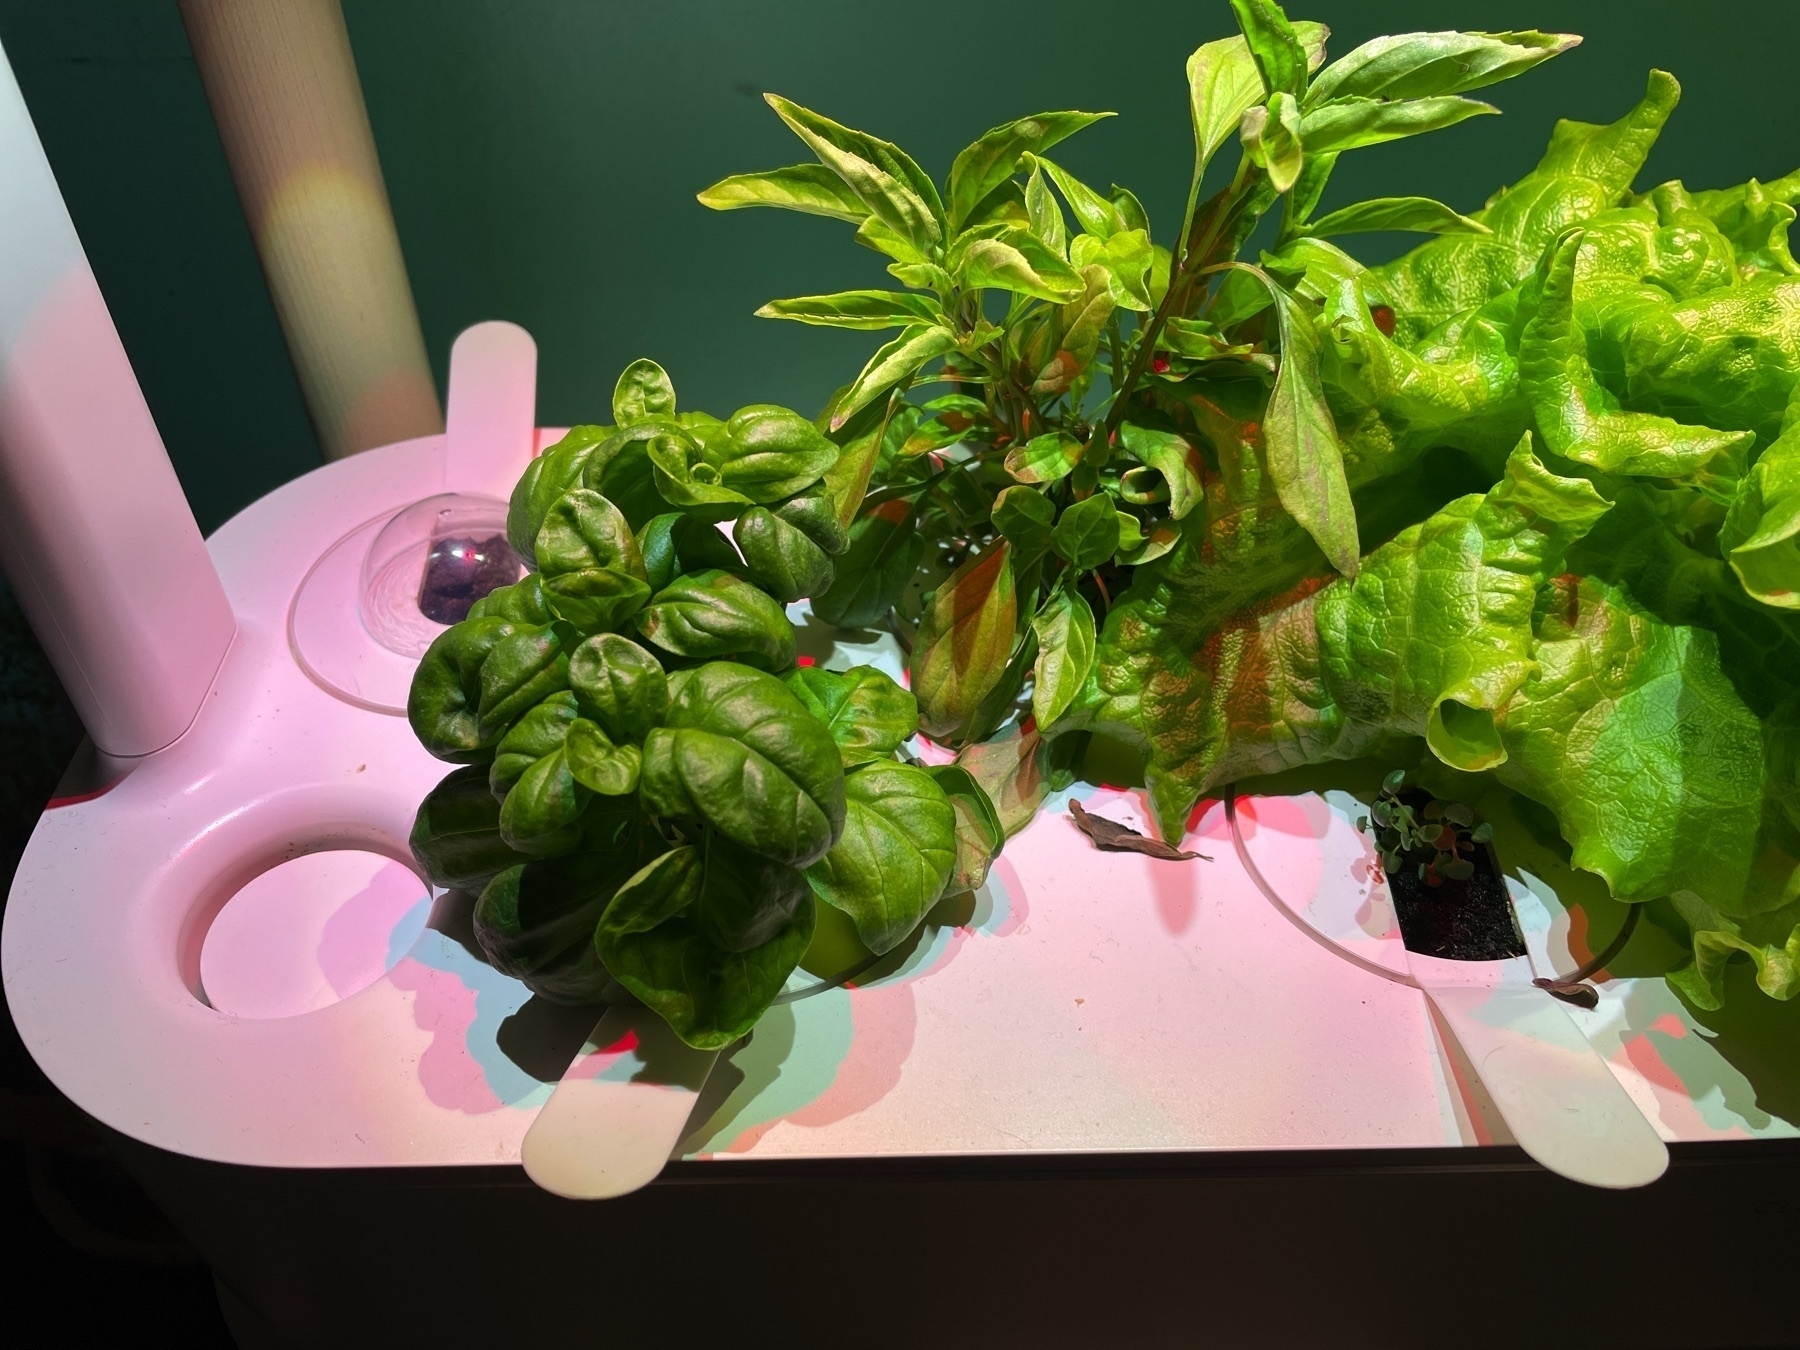 Hydroponic gardening system with plants.